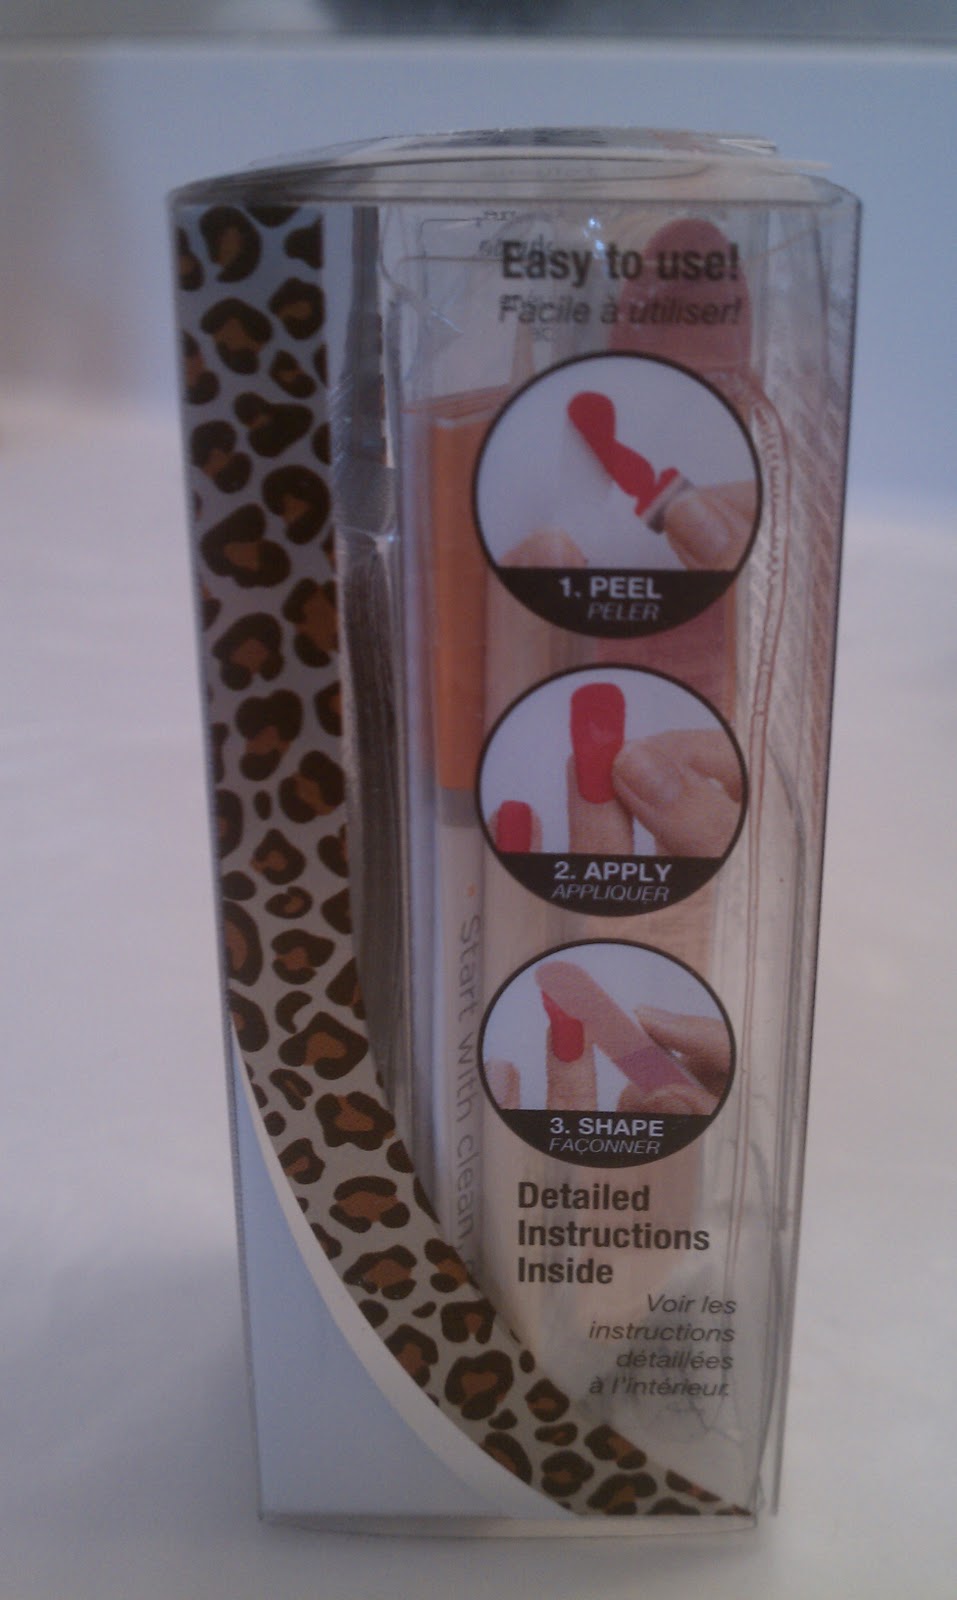 I picked up the leopard print ones because that is one design I haven't been